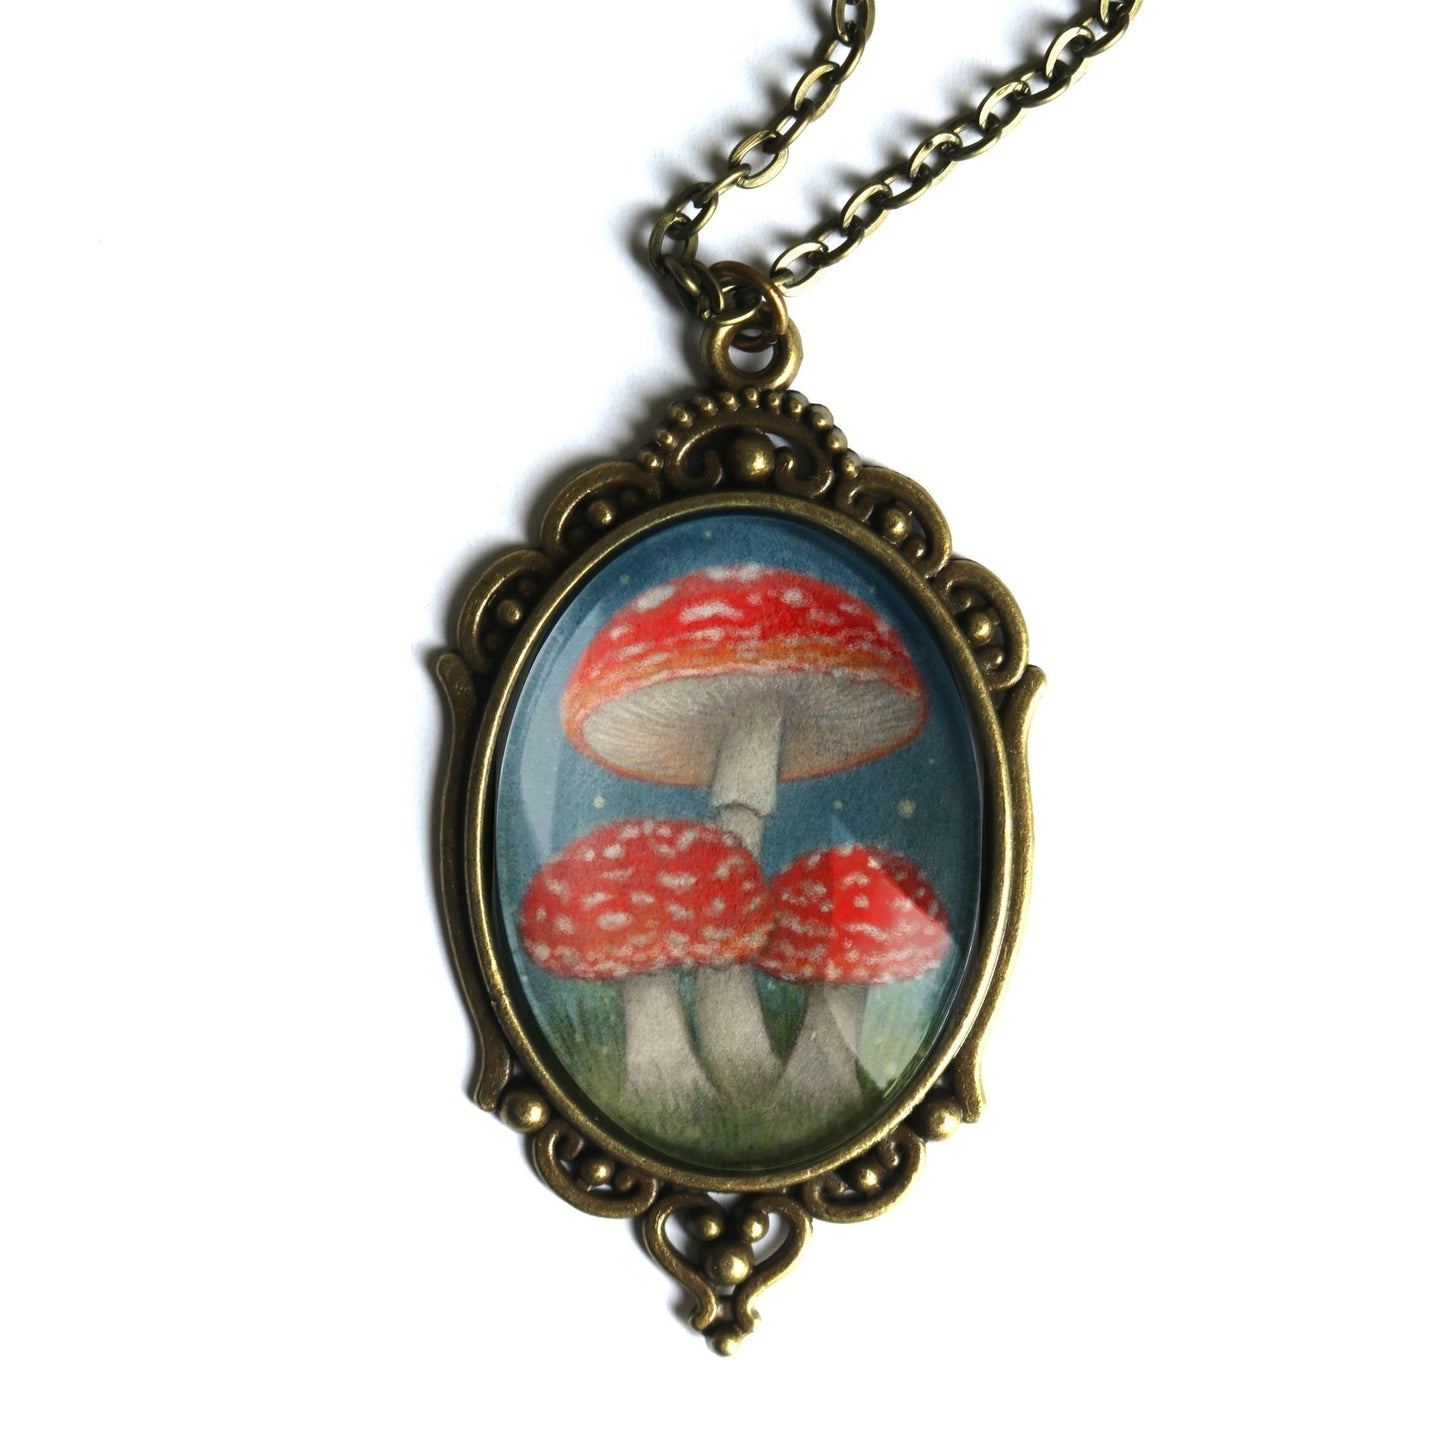 Moonlit Mushrooms Ornate Oval Cottage Core Pendant Necklace | Handmade in the US